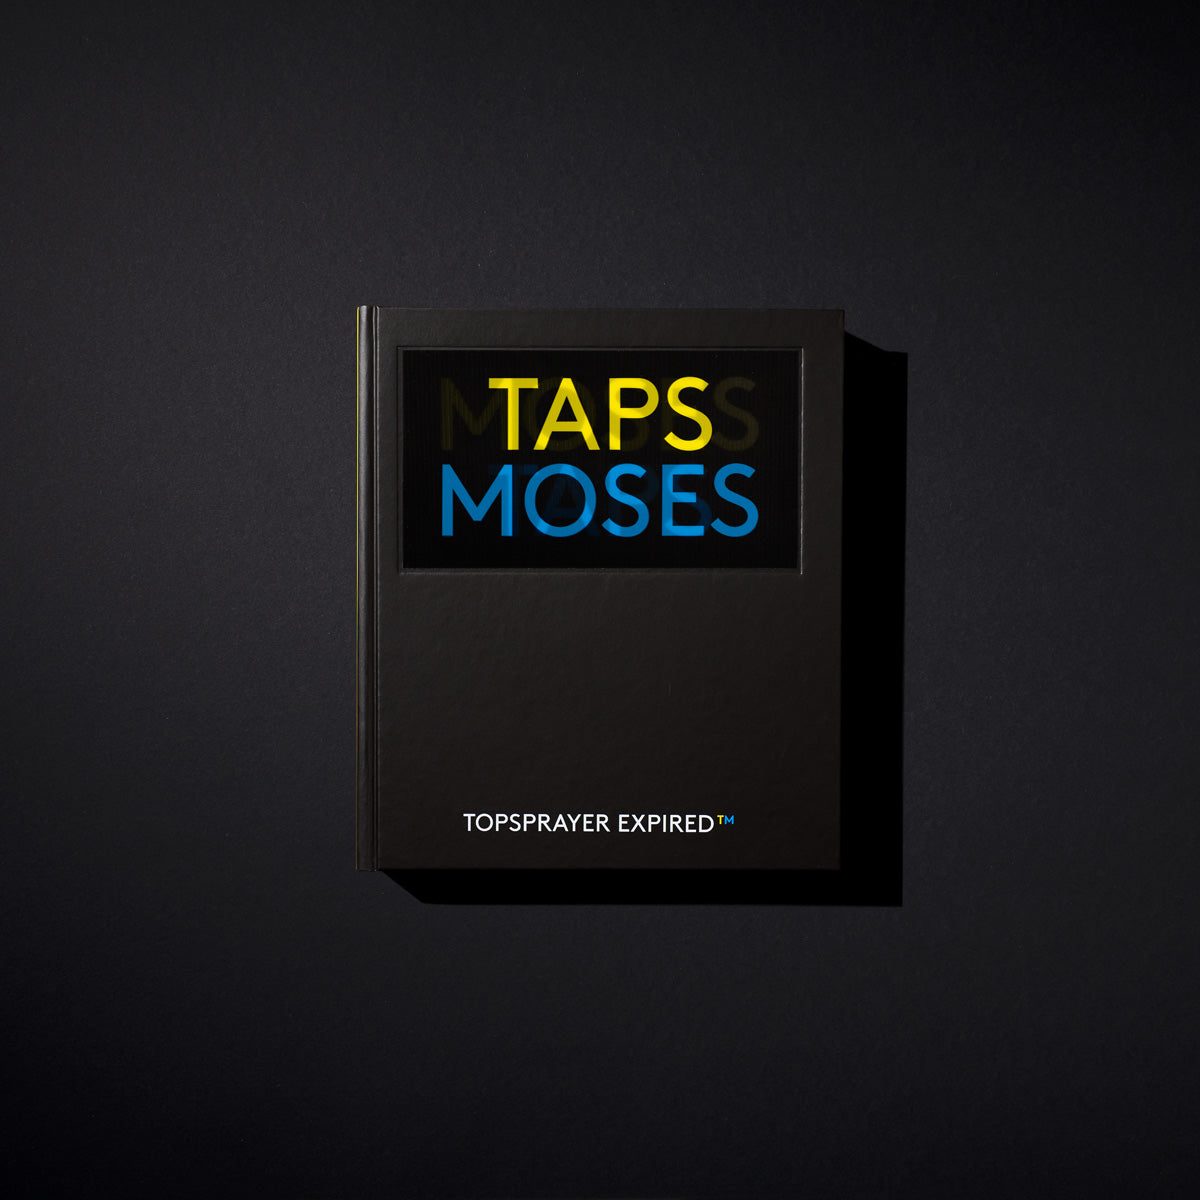 "Topsprayer Expired™" by Moses & Taps™